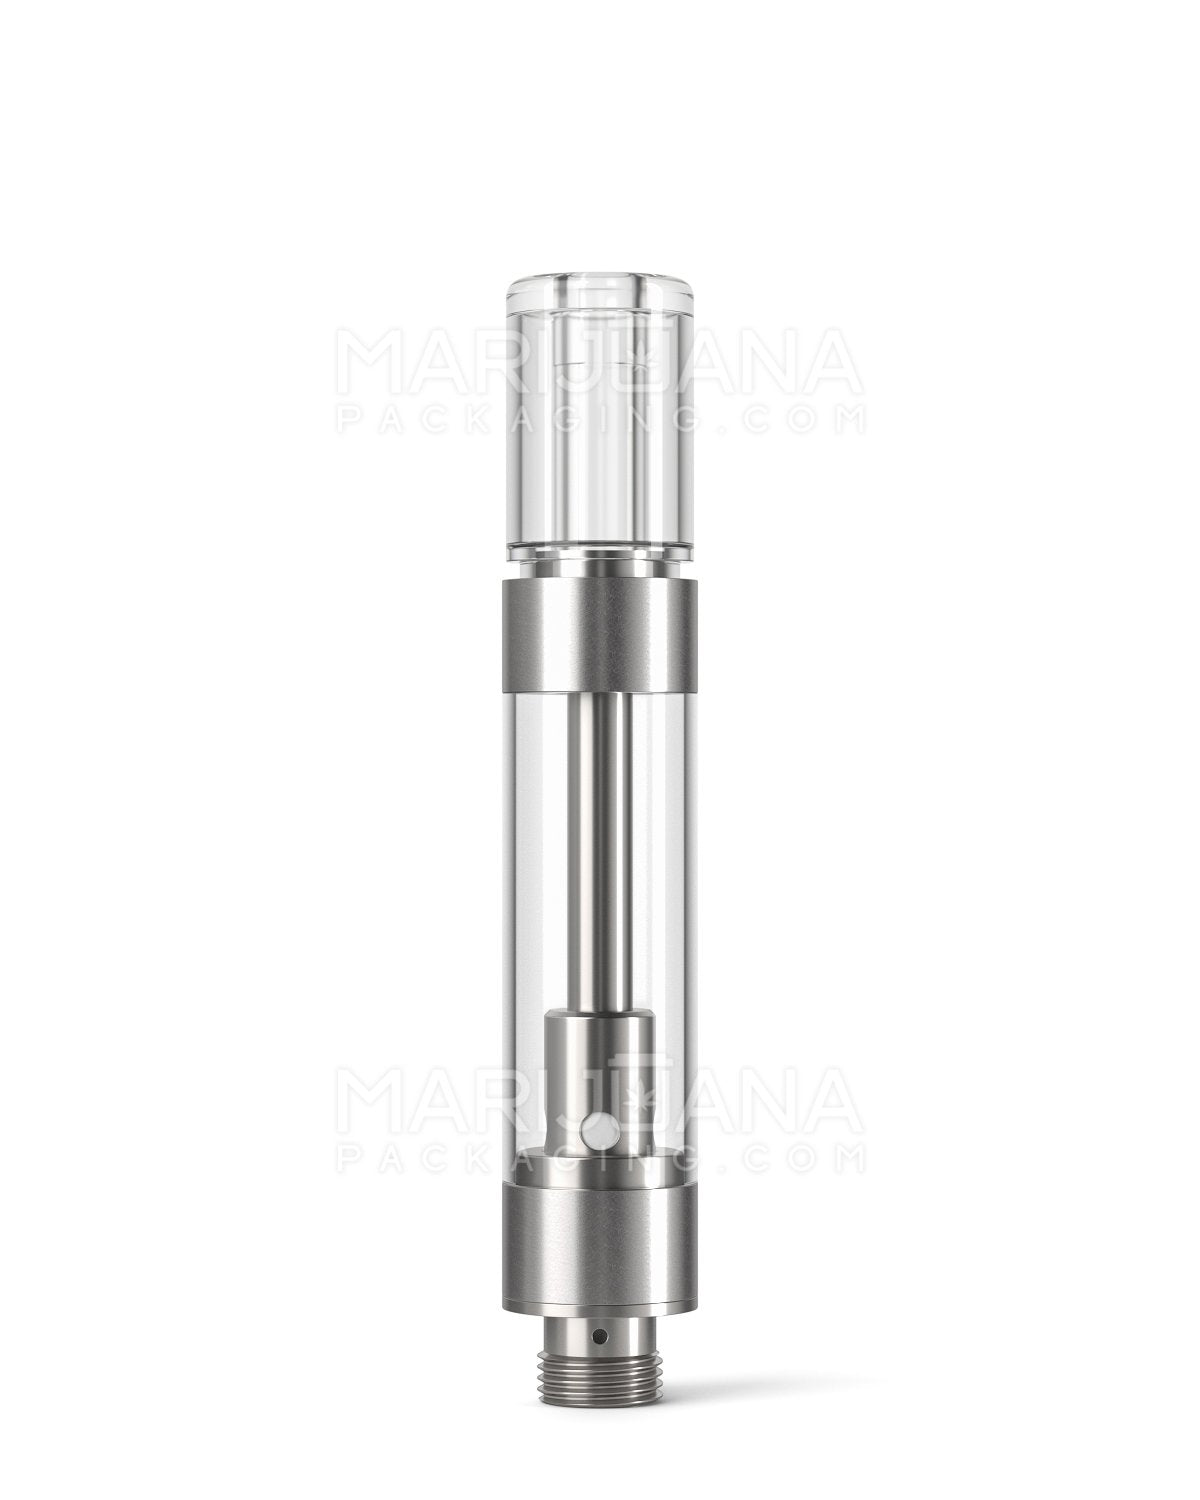 CCELL | Liquid6 Reactor Plastic Cartridge with Barrel Clear Plastic Mouthpiece | 1mL - Press On | Sample - 1